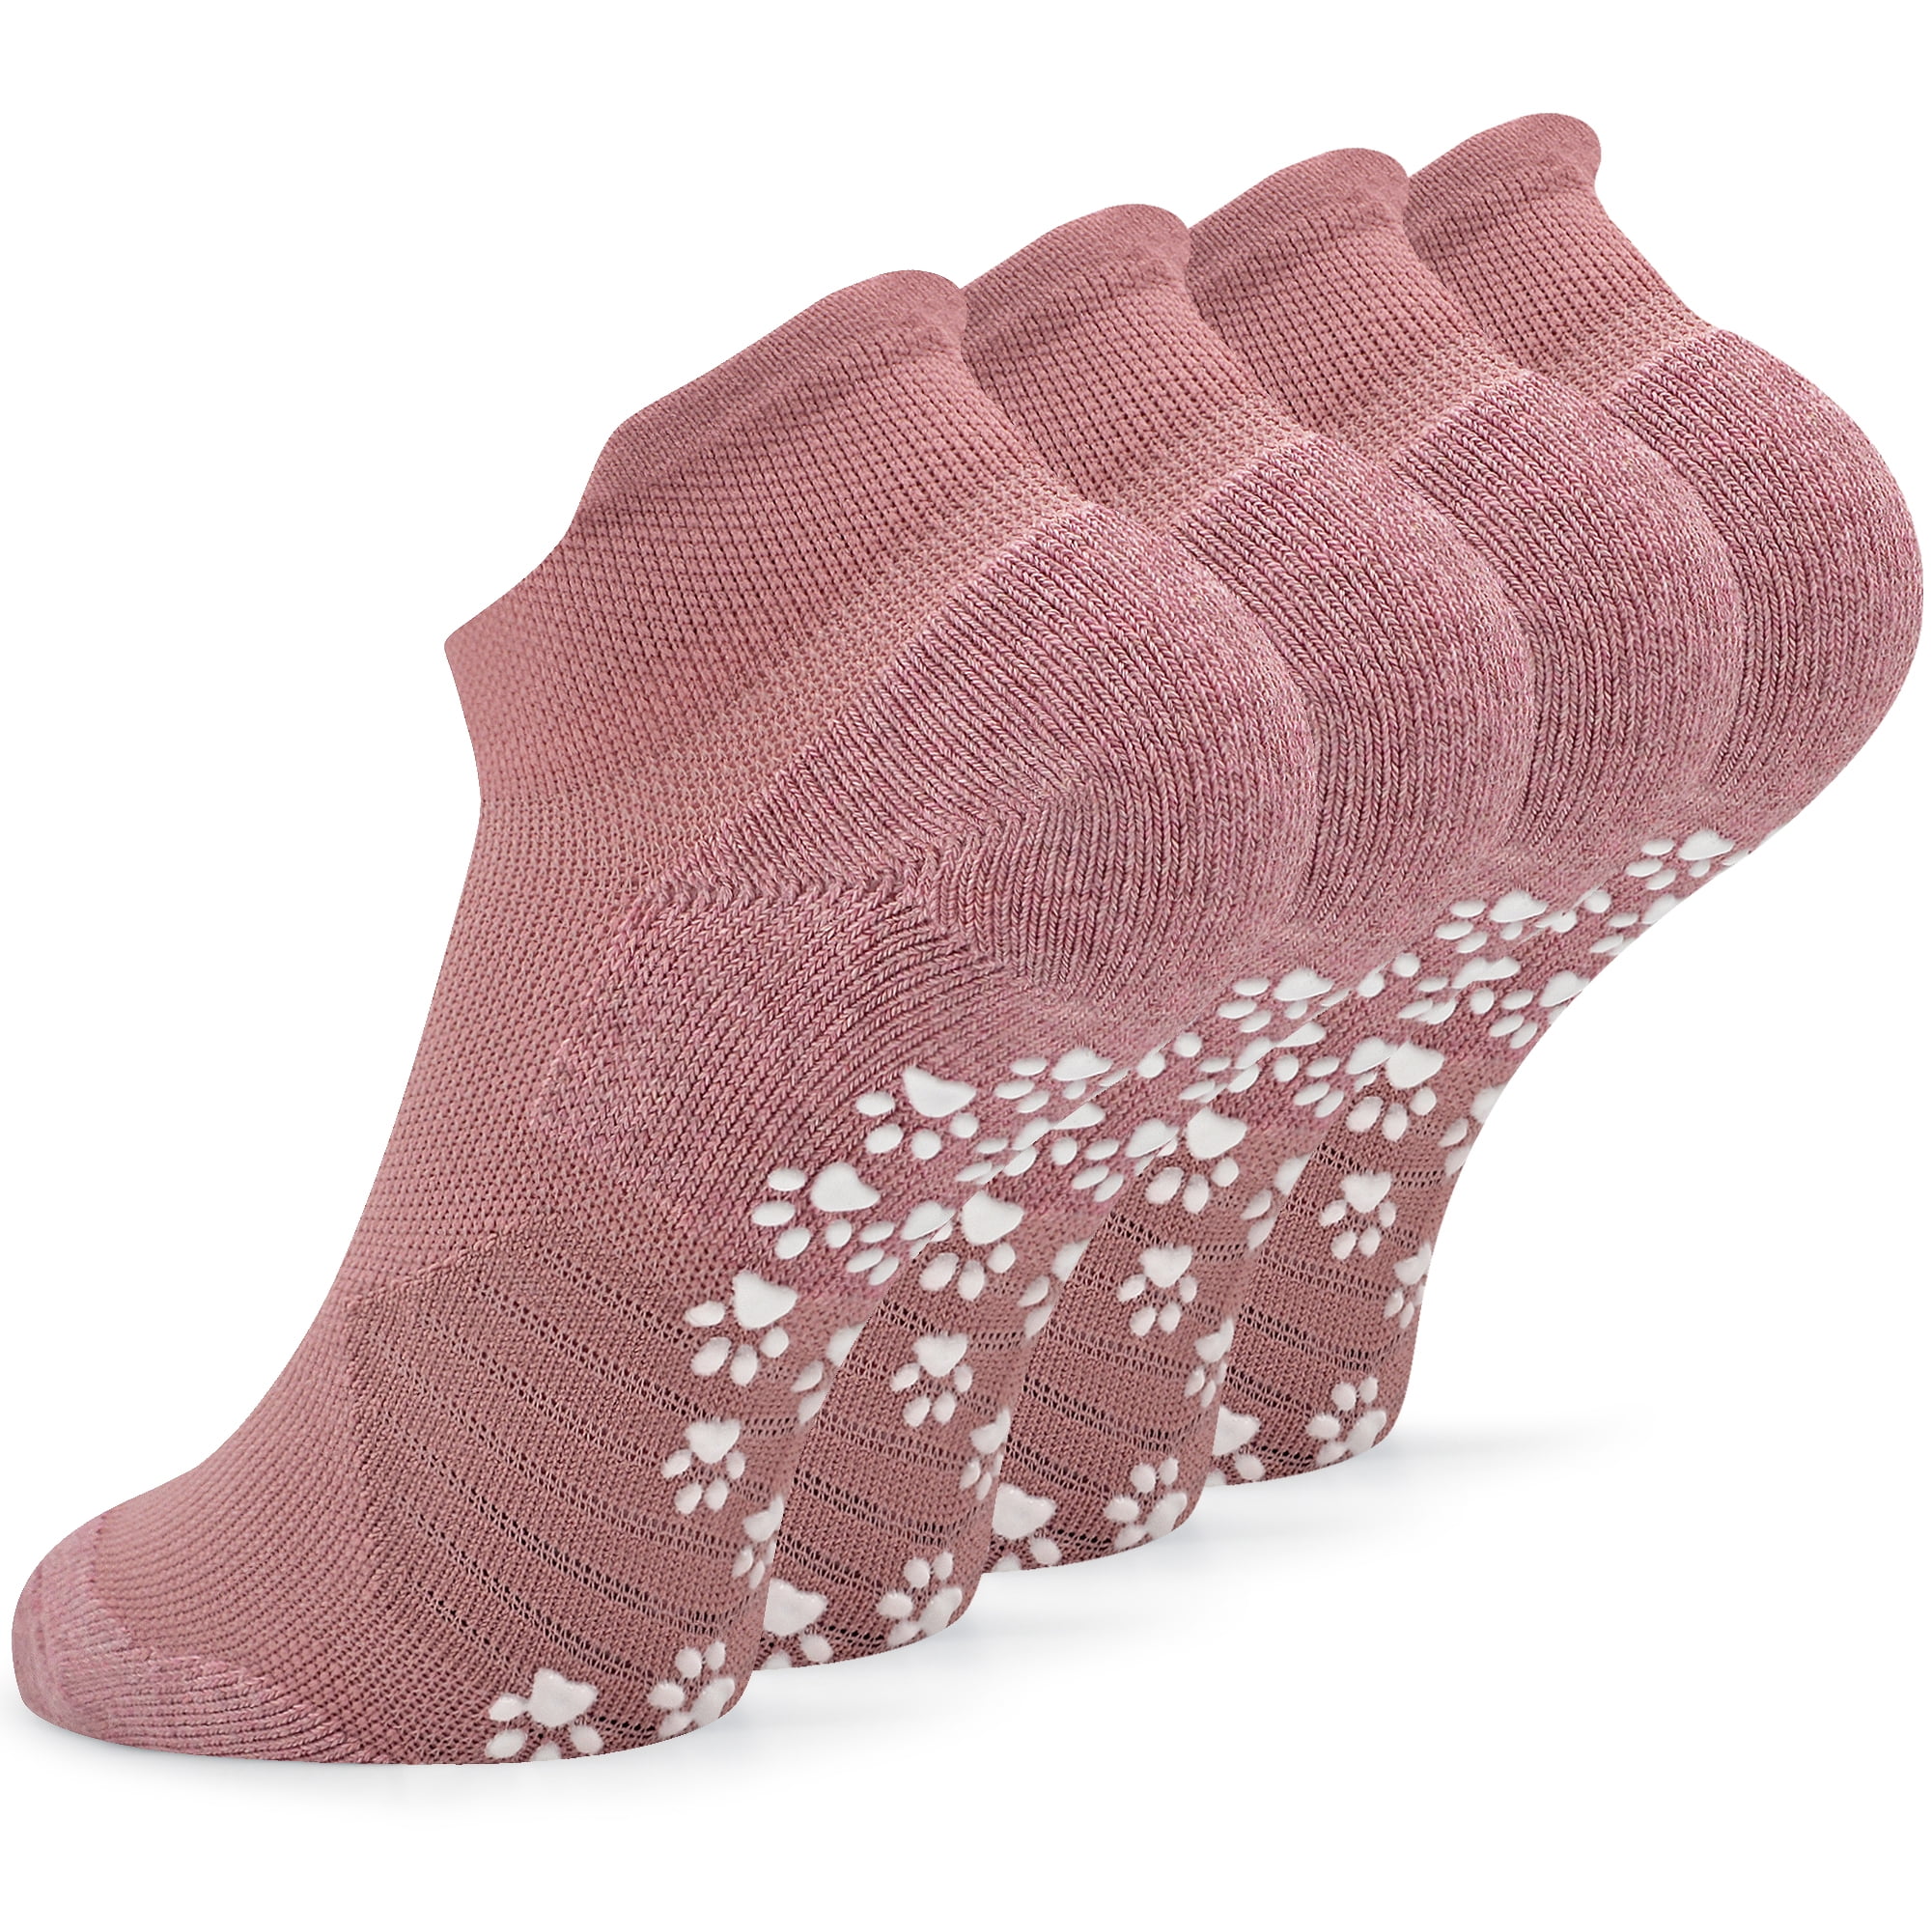 Busy Socks Women's Medium Fitness Yoga Socks with Arch Support